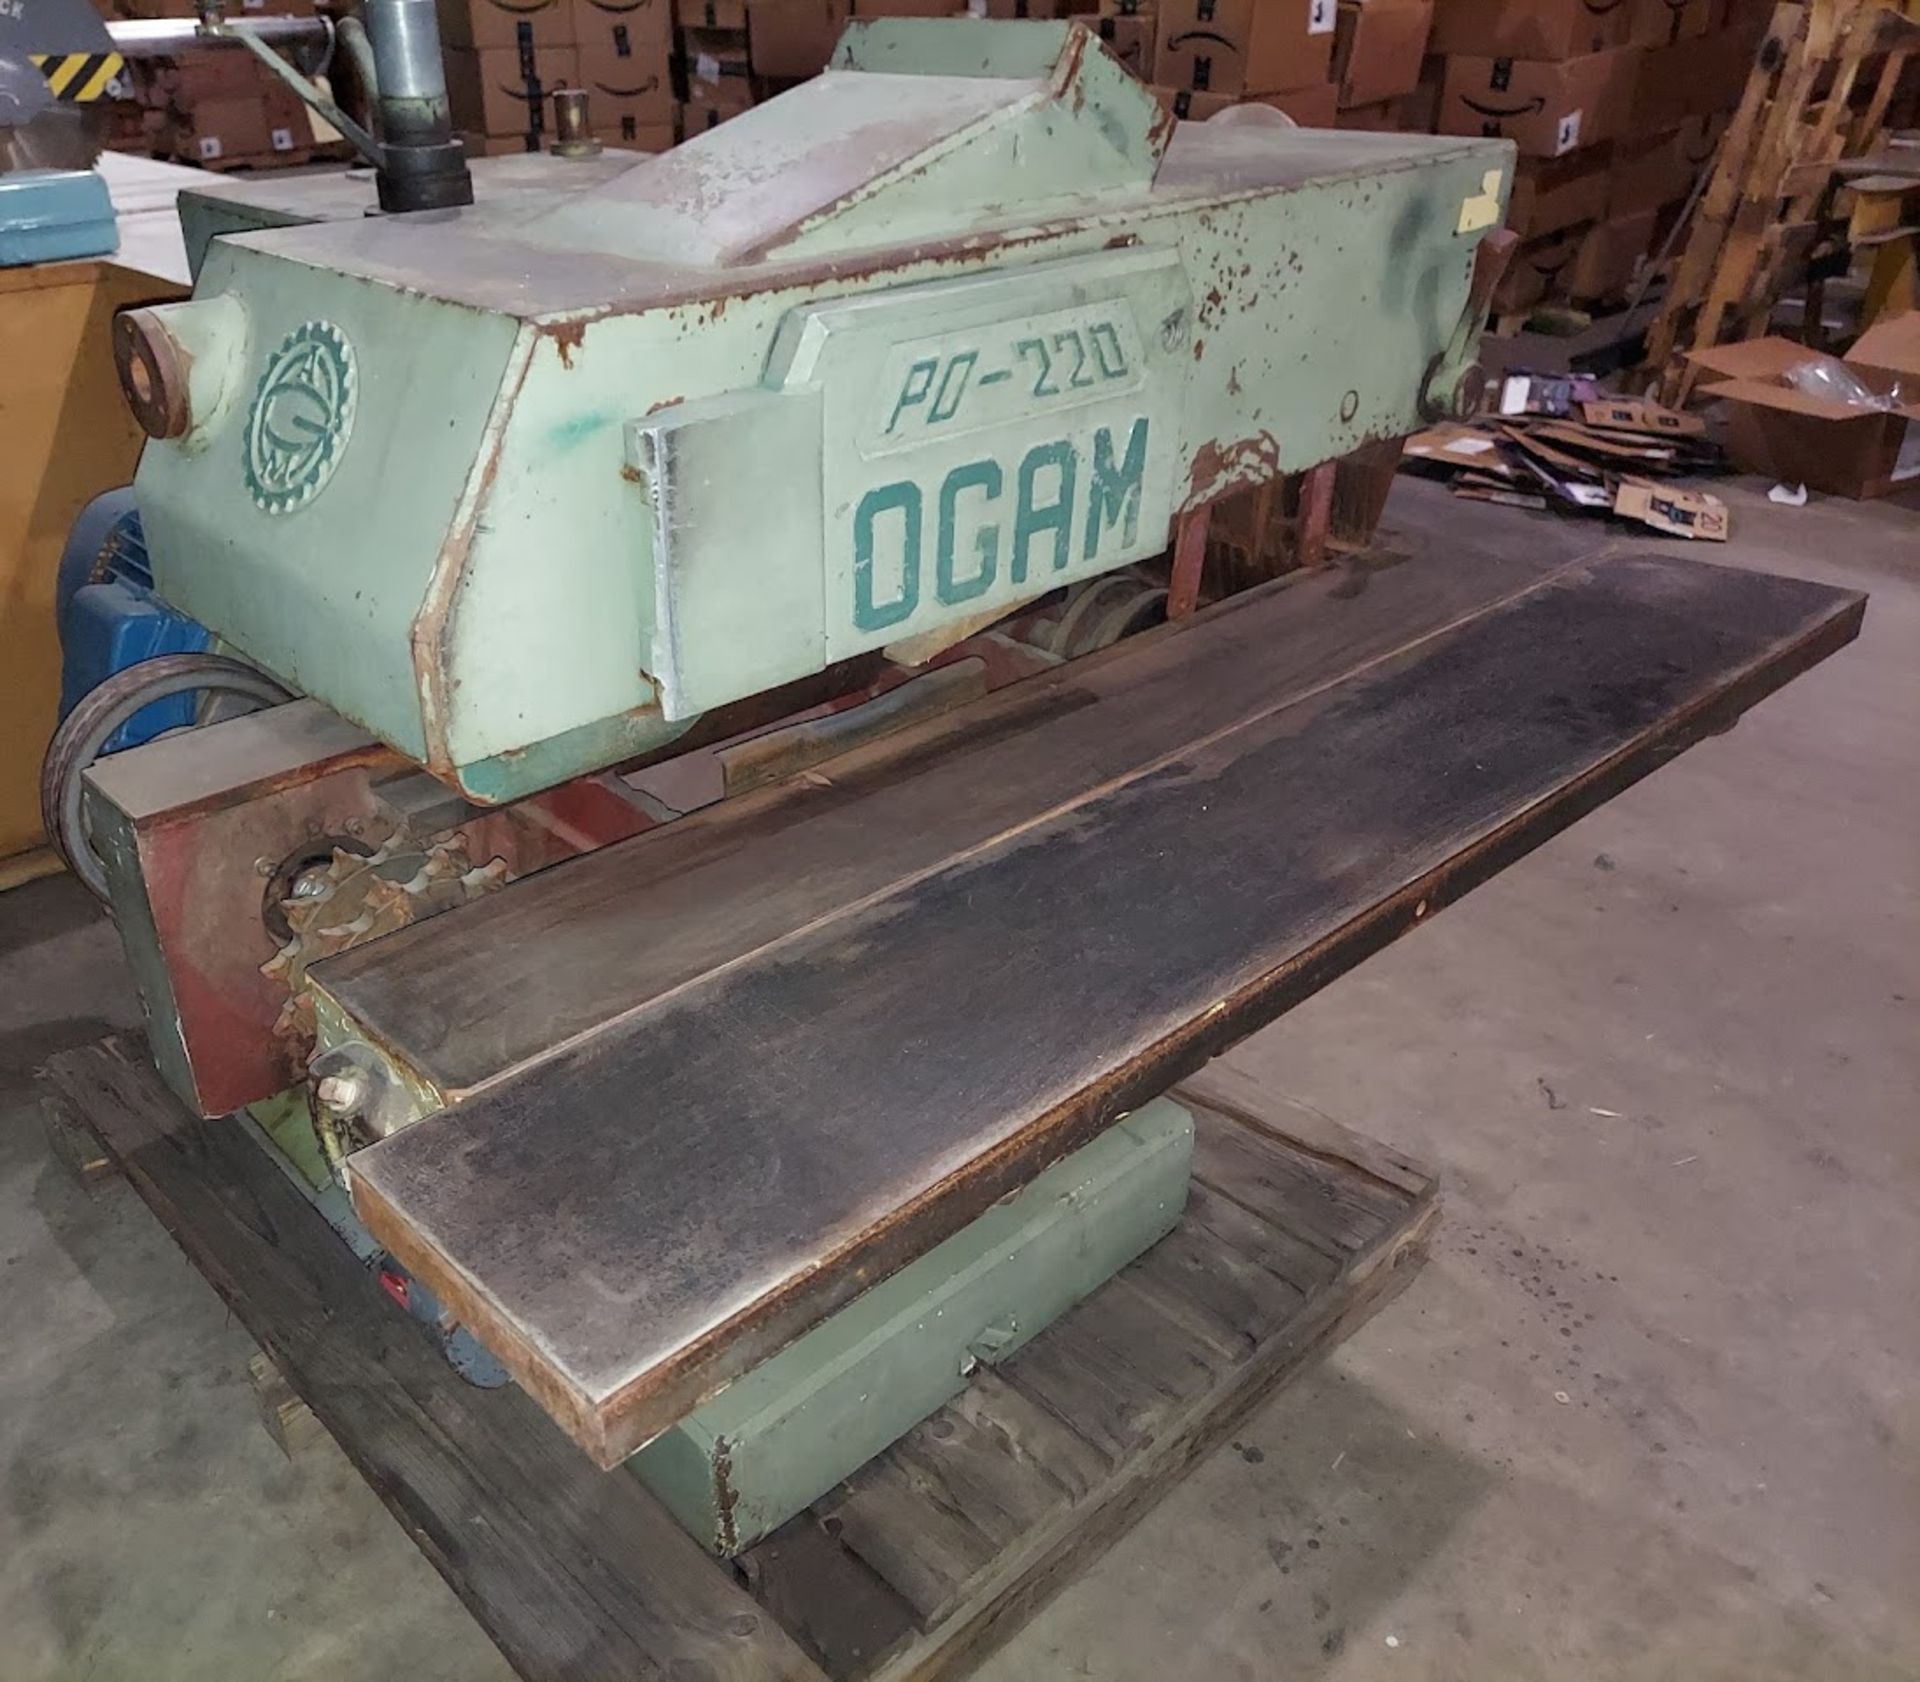 Ogam PO-220 Dip Chain Gang Rip Saw, Motor is 25 HP 220/440 Volt 3ph - Image 5 of 5